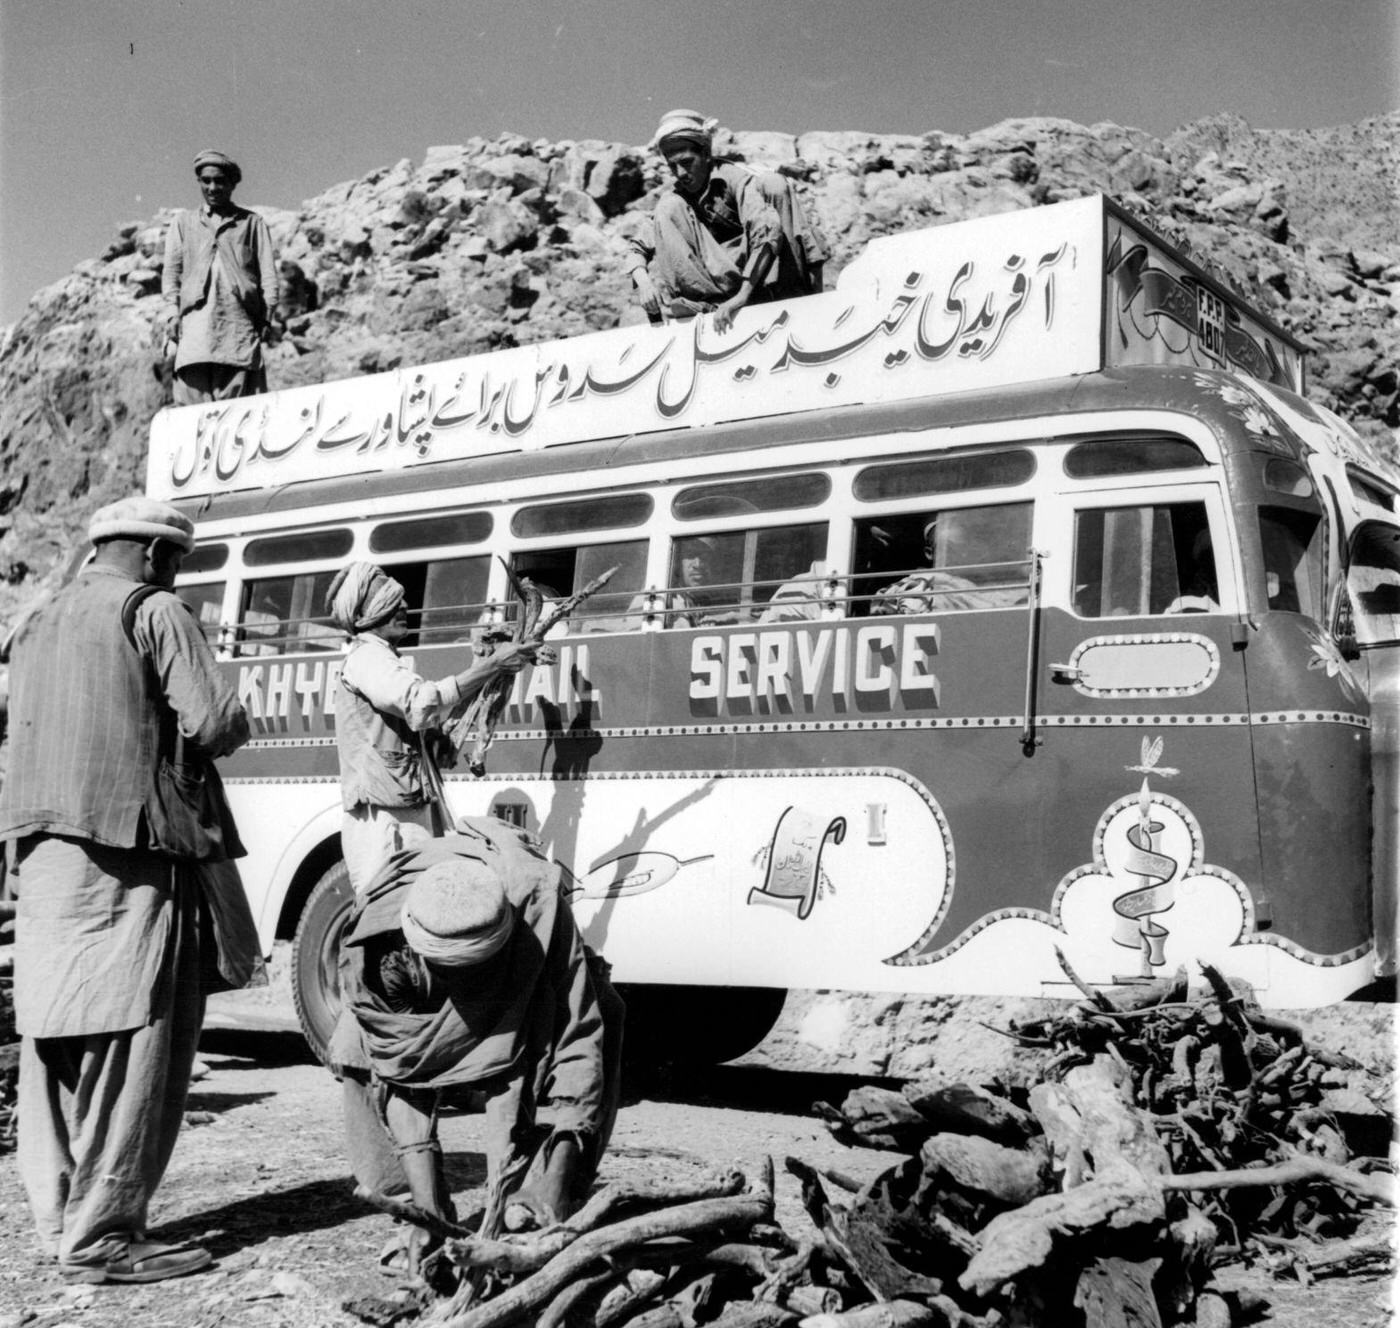 Bus that serves the Khyber Pass in Afghanistan, 1966.